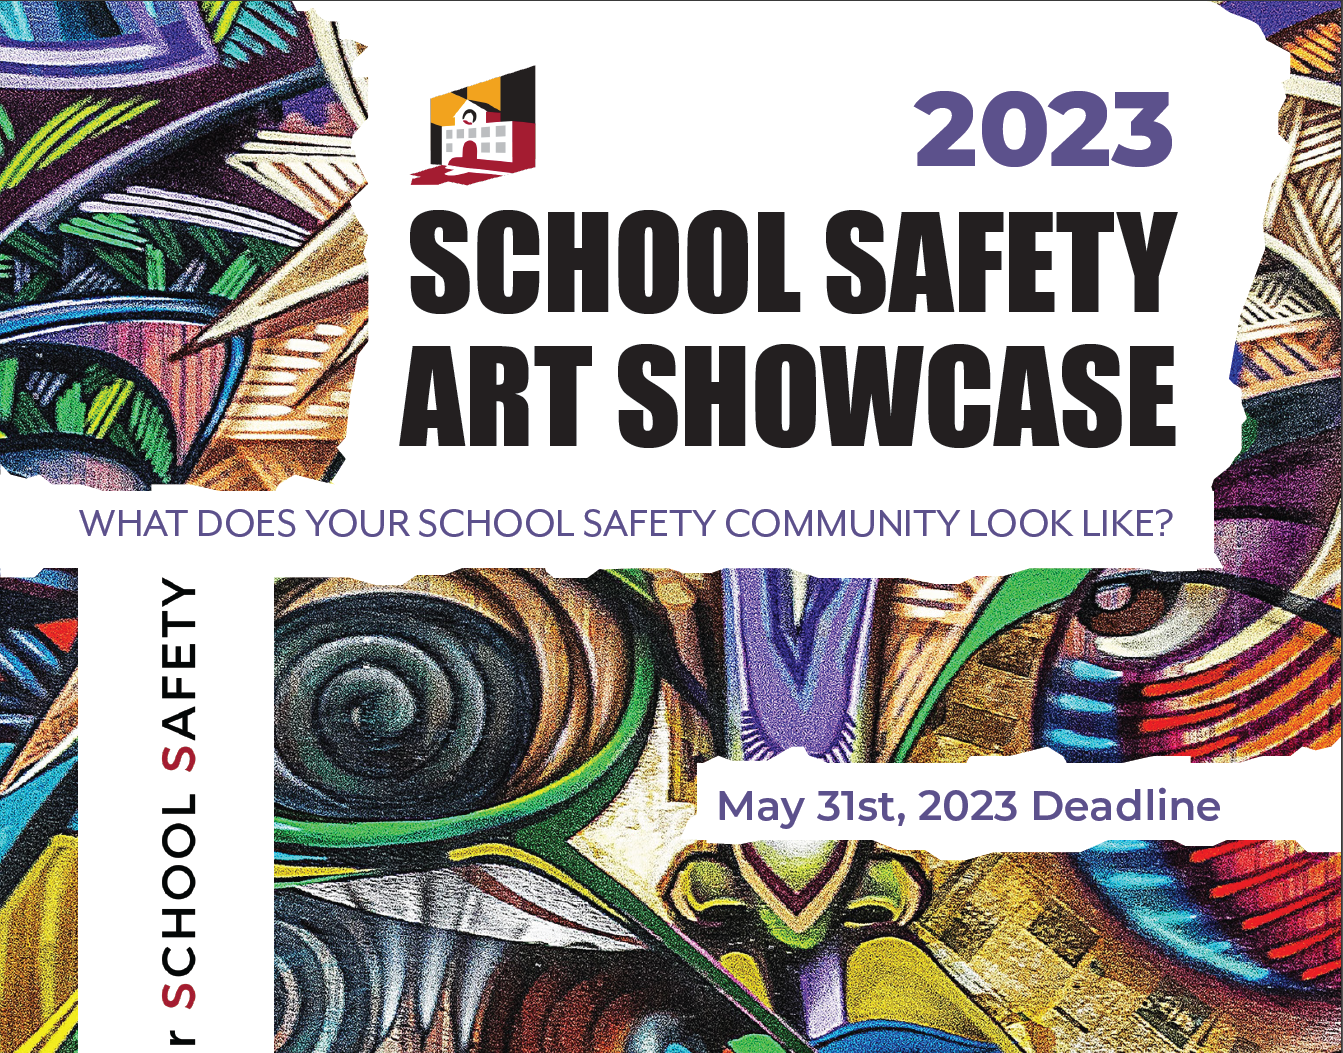 Image showing school safety art showcase competition details